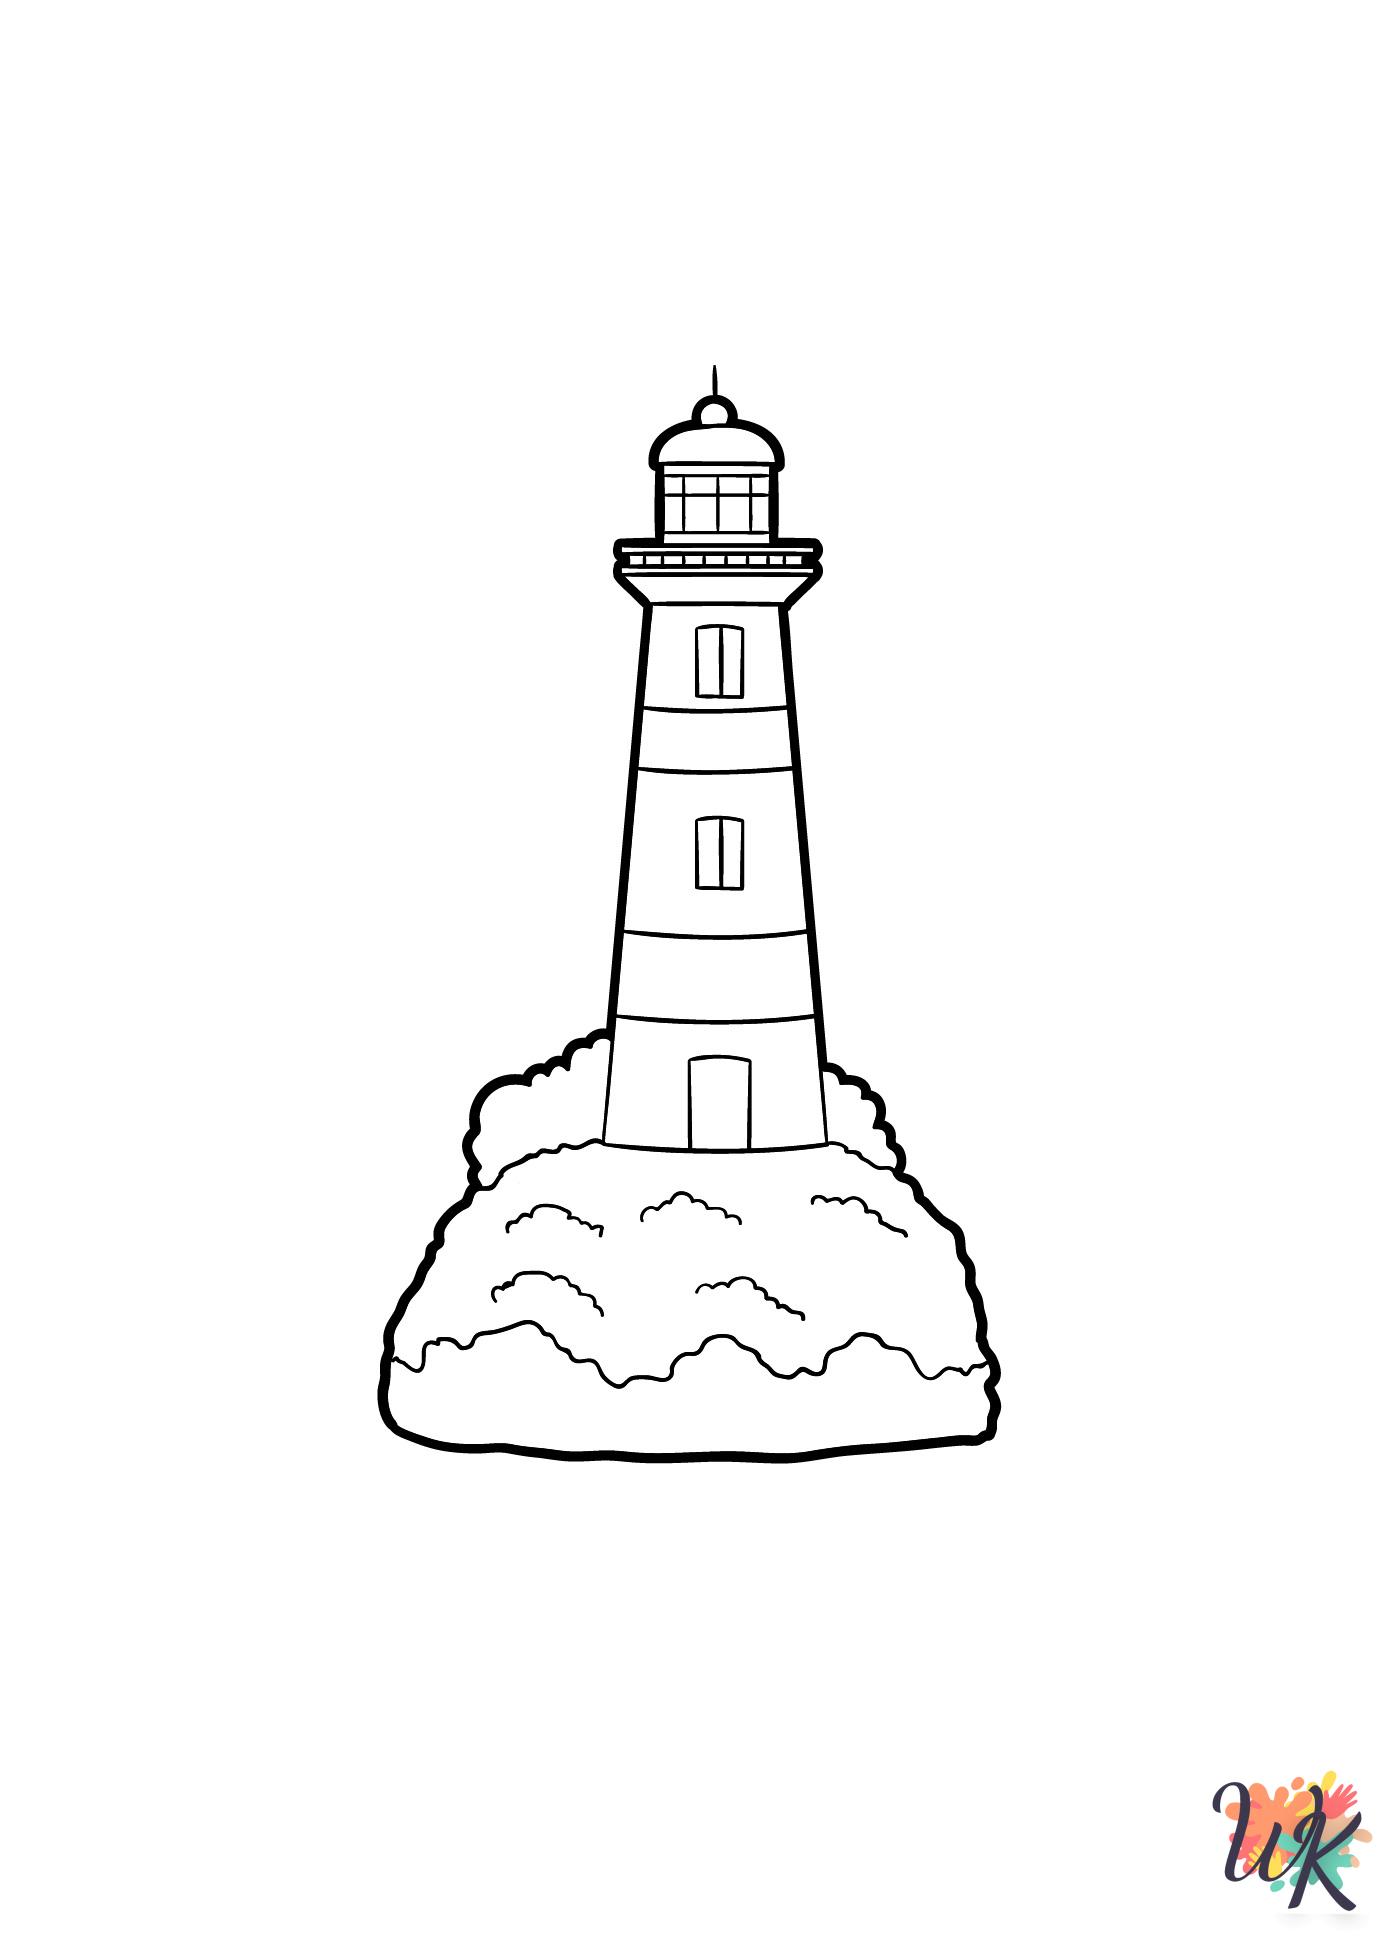 Lighthouse coloring pages grinch